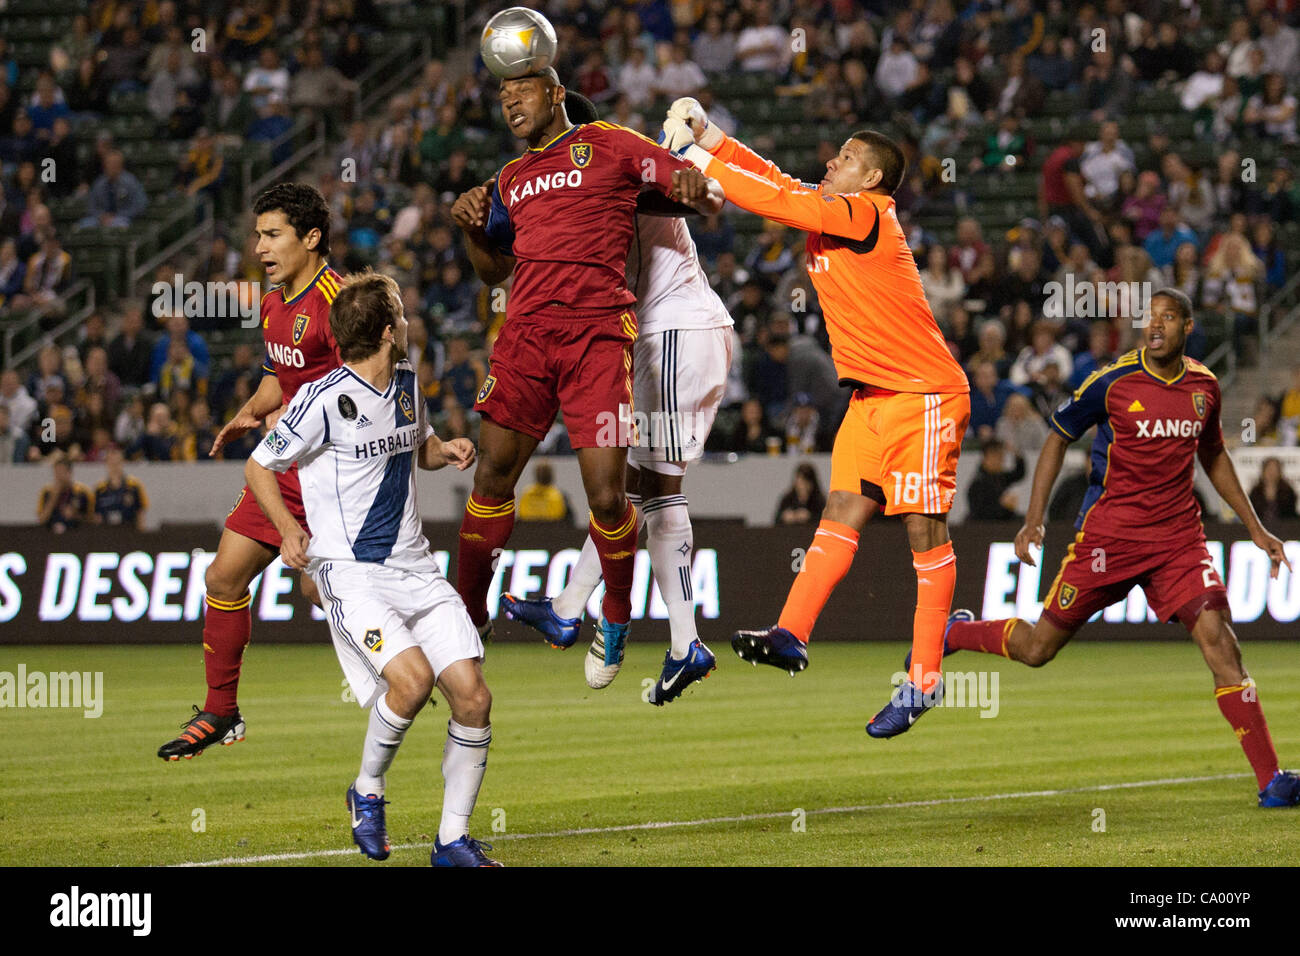 March 10, 2012 - Carson, California, U.S - Real Salt Lake defender Jamison Olave #4 gets a head on a corner kick while Real Salt Lake goalkeeper Nick Rimando #18 tries to punch it away during the Major League Soccer game between Real Salt Lake and the Los Angeles Galaxy at the Home Depot Center. Rea Stock Photo